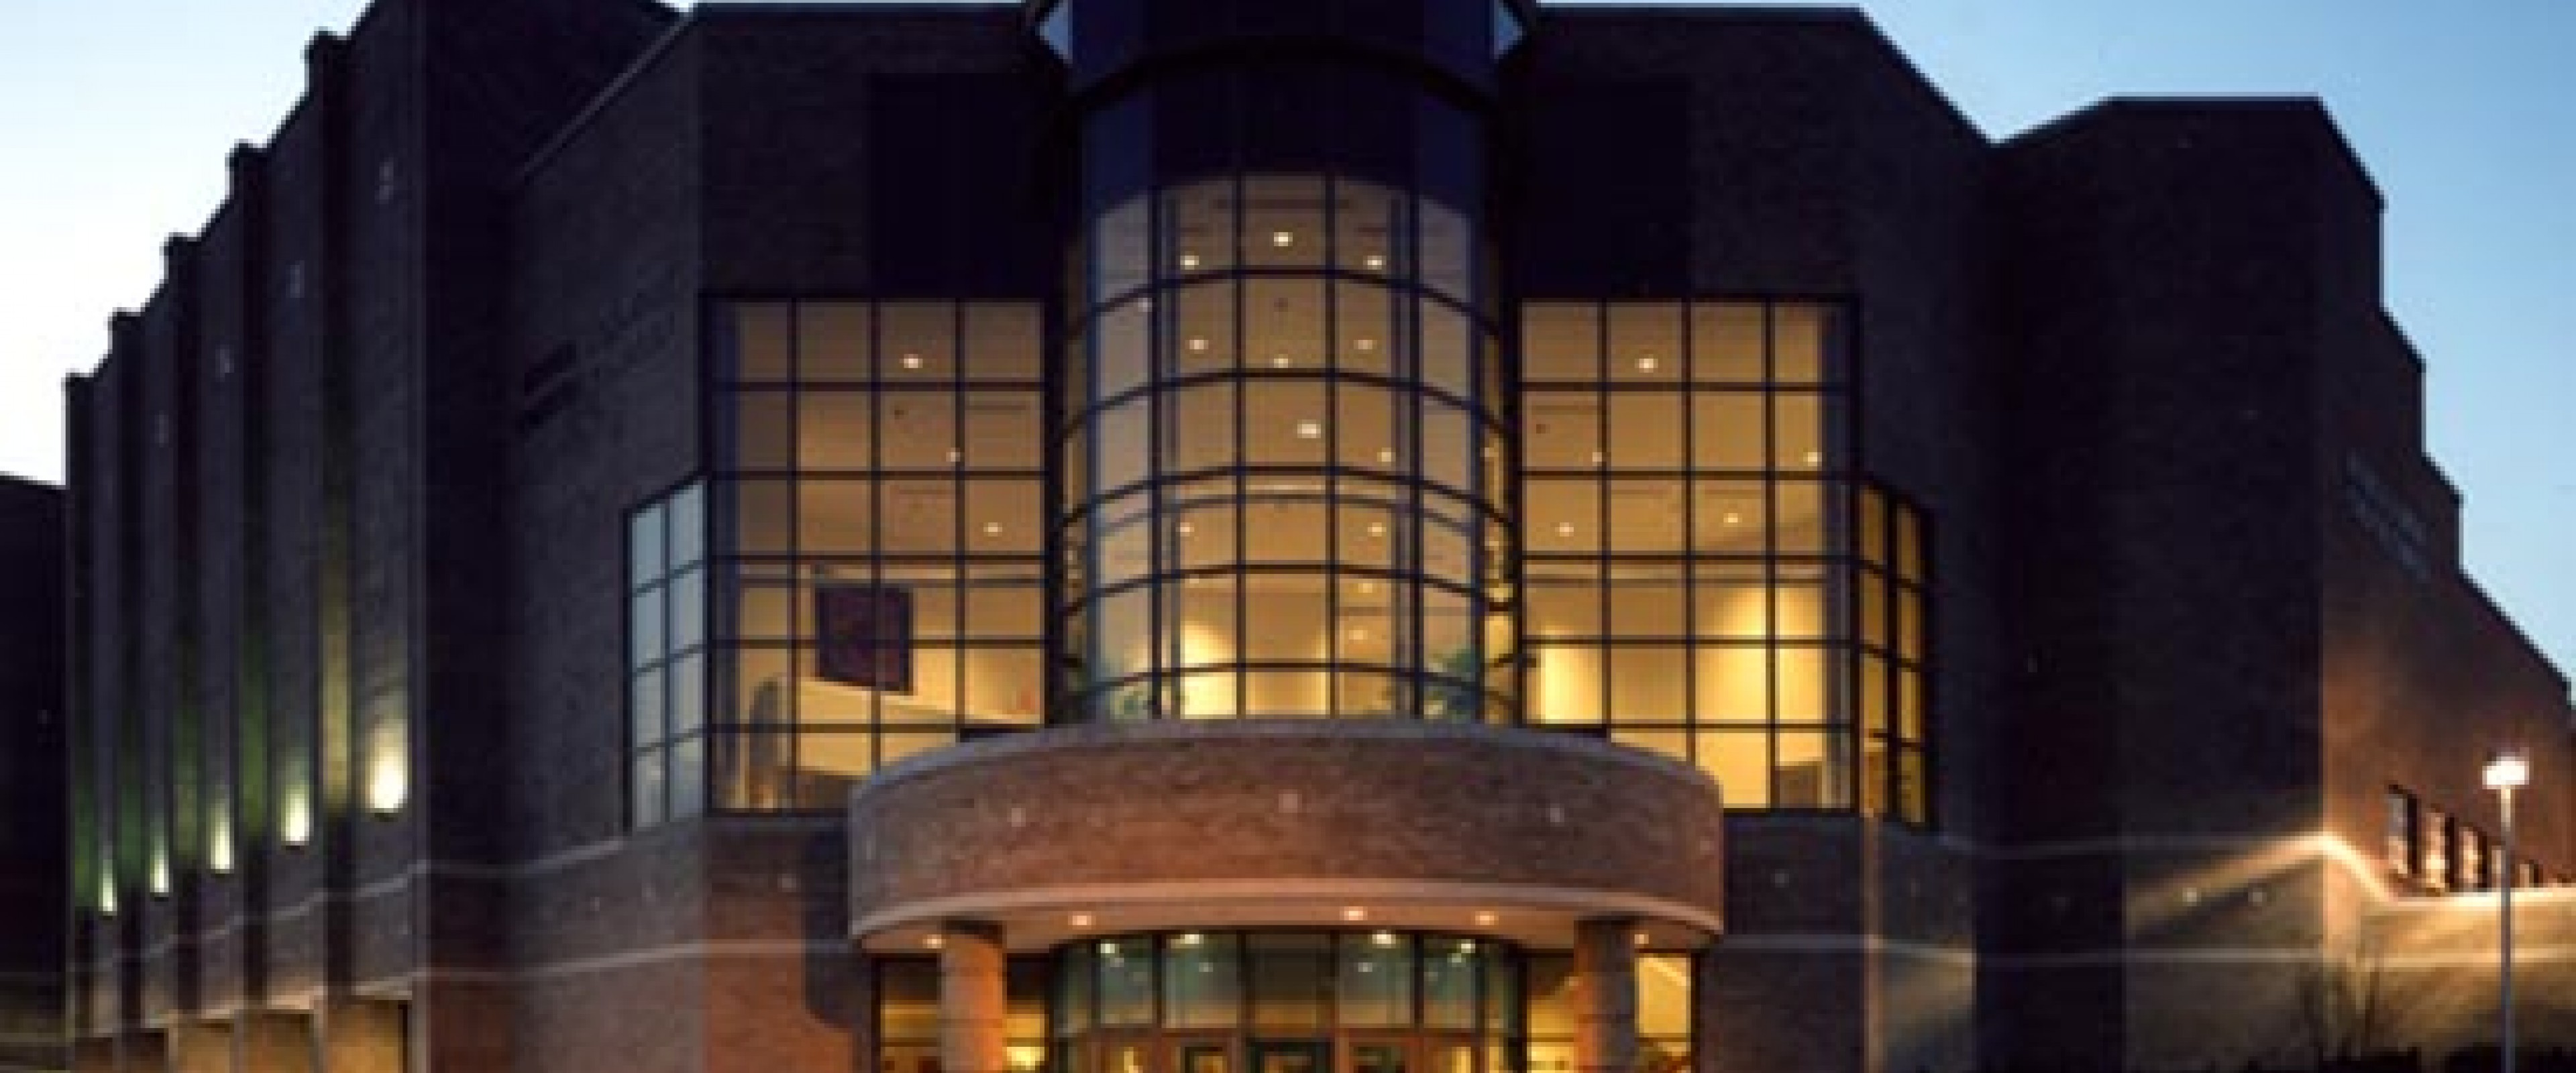 Front of the GIlmore Theatre Complex at night.